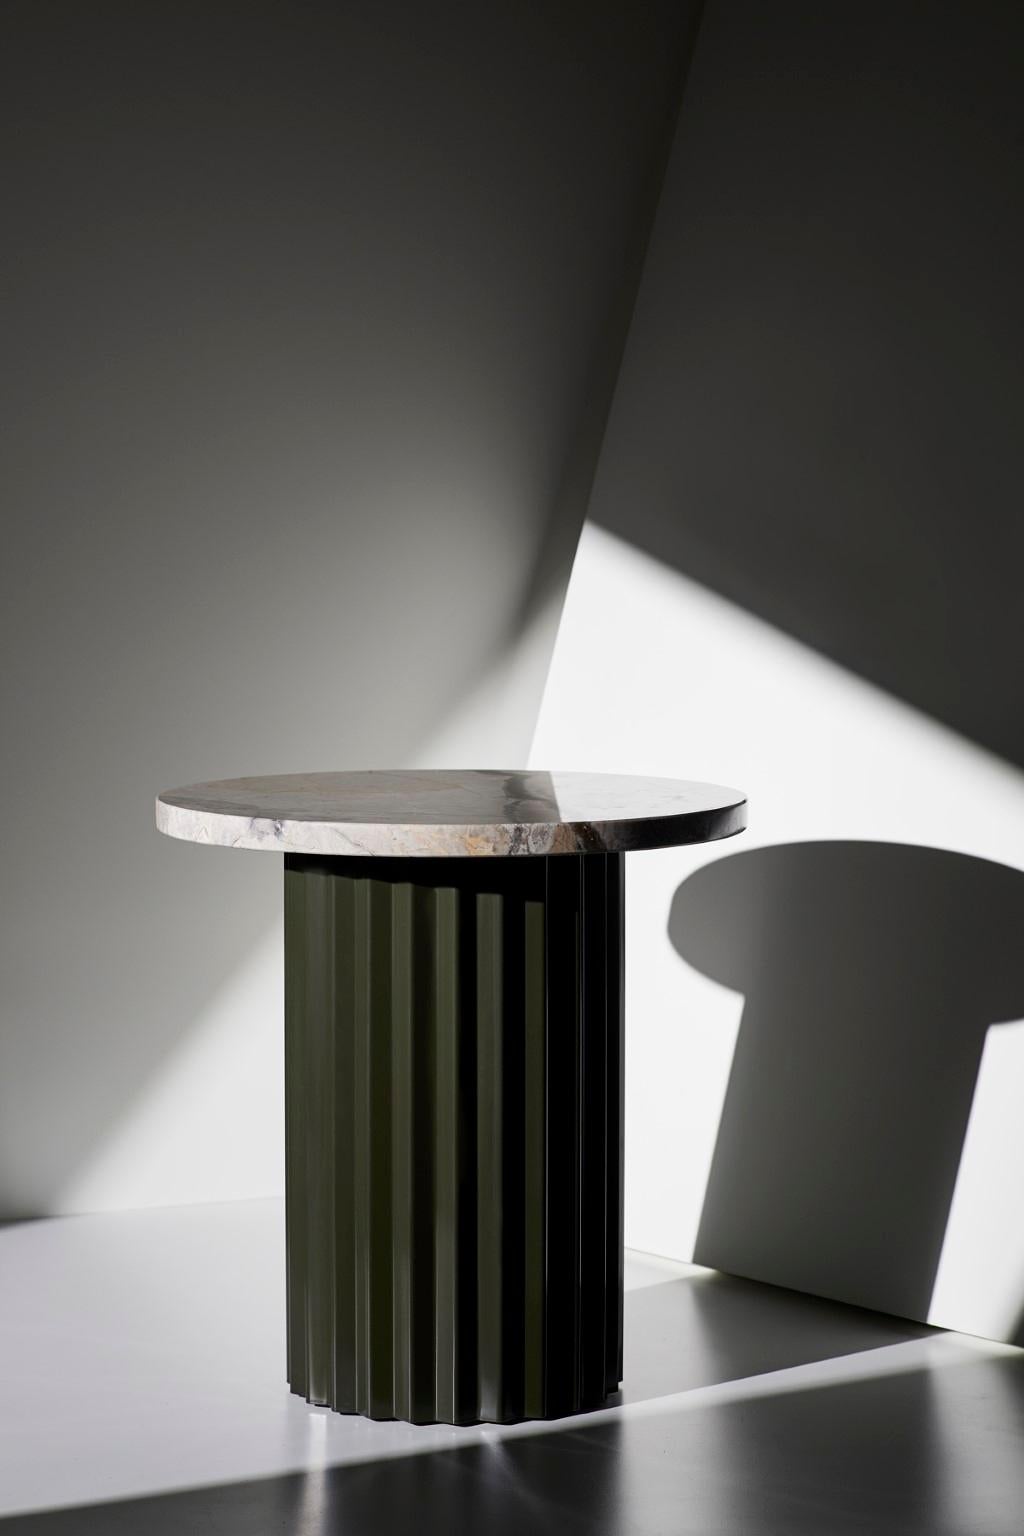 Column lounge table with marble 40 by Lisette Rützou.
Dimensions: D 40 x H 41 cm
Materials: Marble
Also available in Ø 60.

2Lisette Rützou’s design is motivated by an urge to articulate a story. Inspired by the beauty of materials, form and